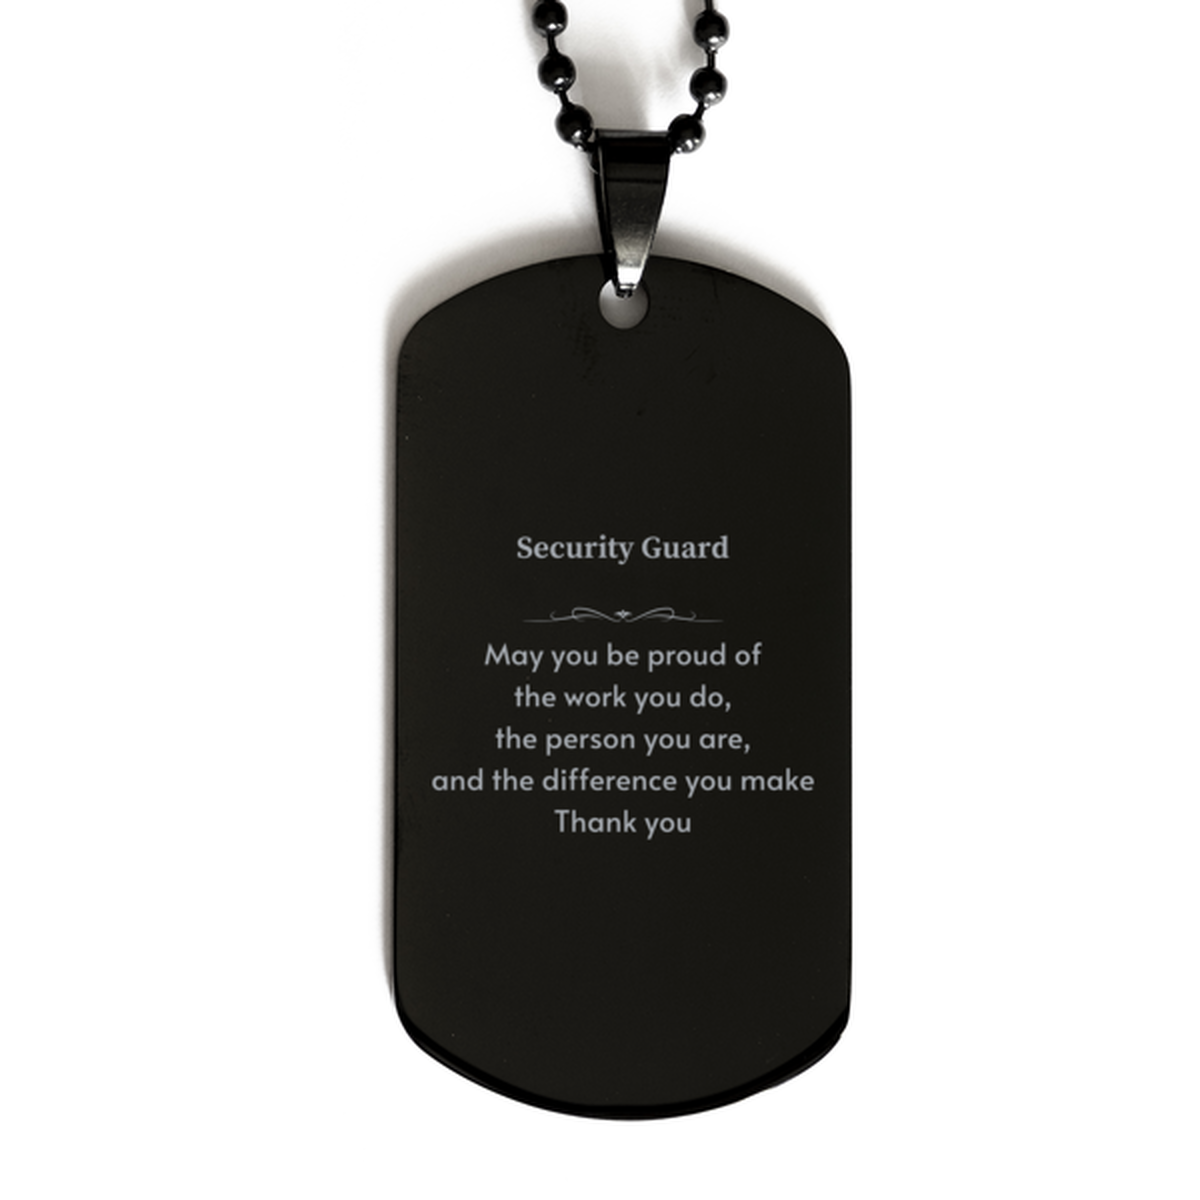 Heartwarming Black Dog Tag Retirement Coworkers Gifts for Security Guard, Security Guard May You be proud of the work you do, the person you are Gifts for Boss Men Women Friends